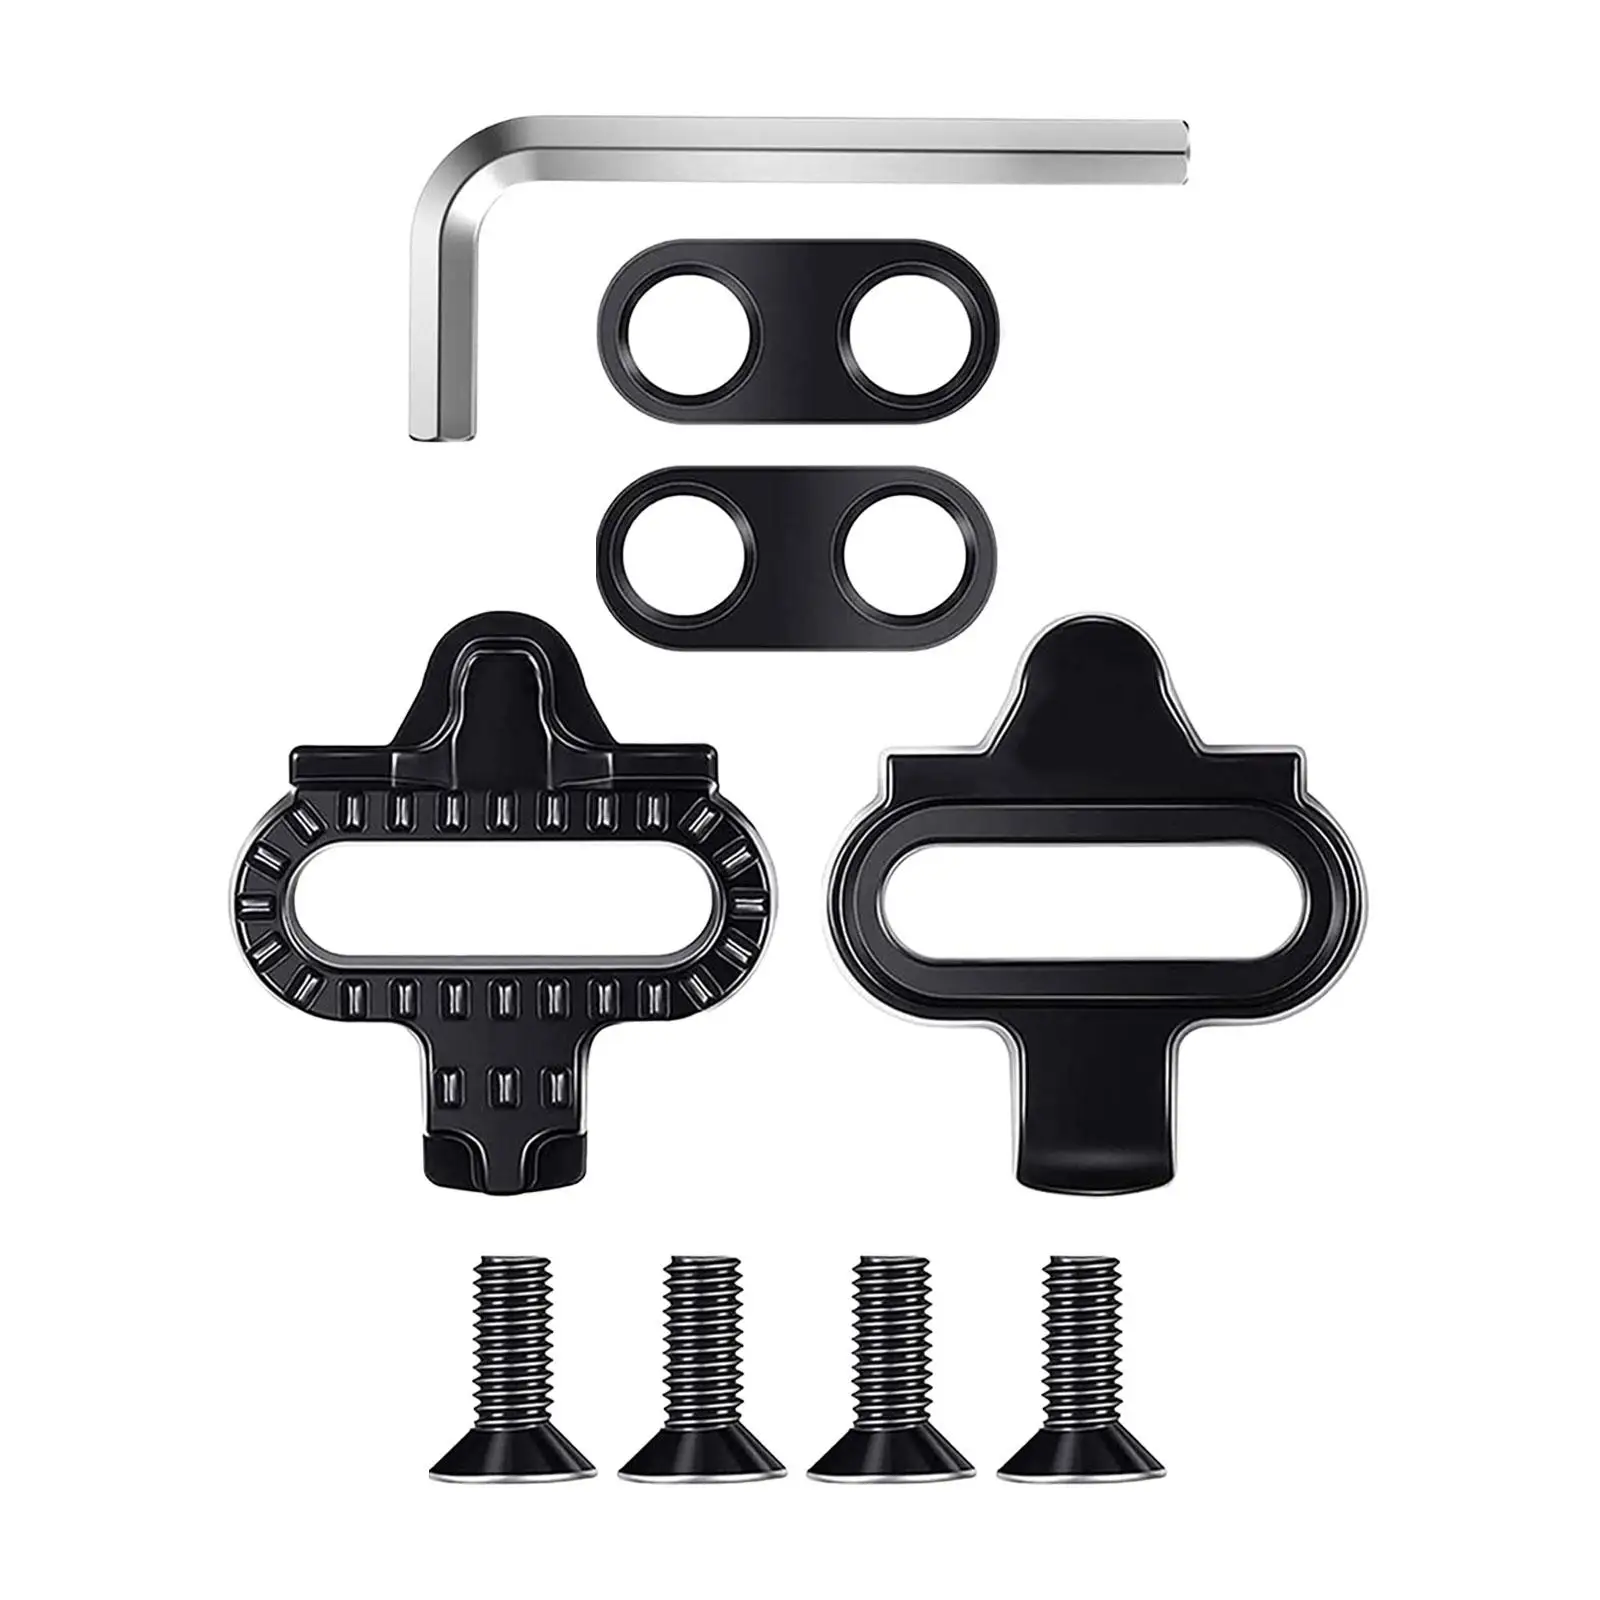 Cleats Pedal Locking Set Wear Resistant Stable Easy Installation Cycling Components Mountain Bikes Bicycle Pedals Cleats Kit